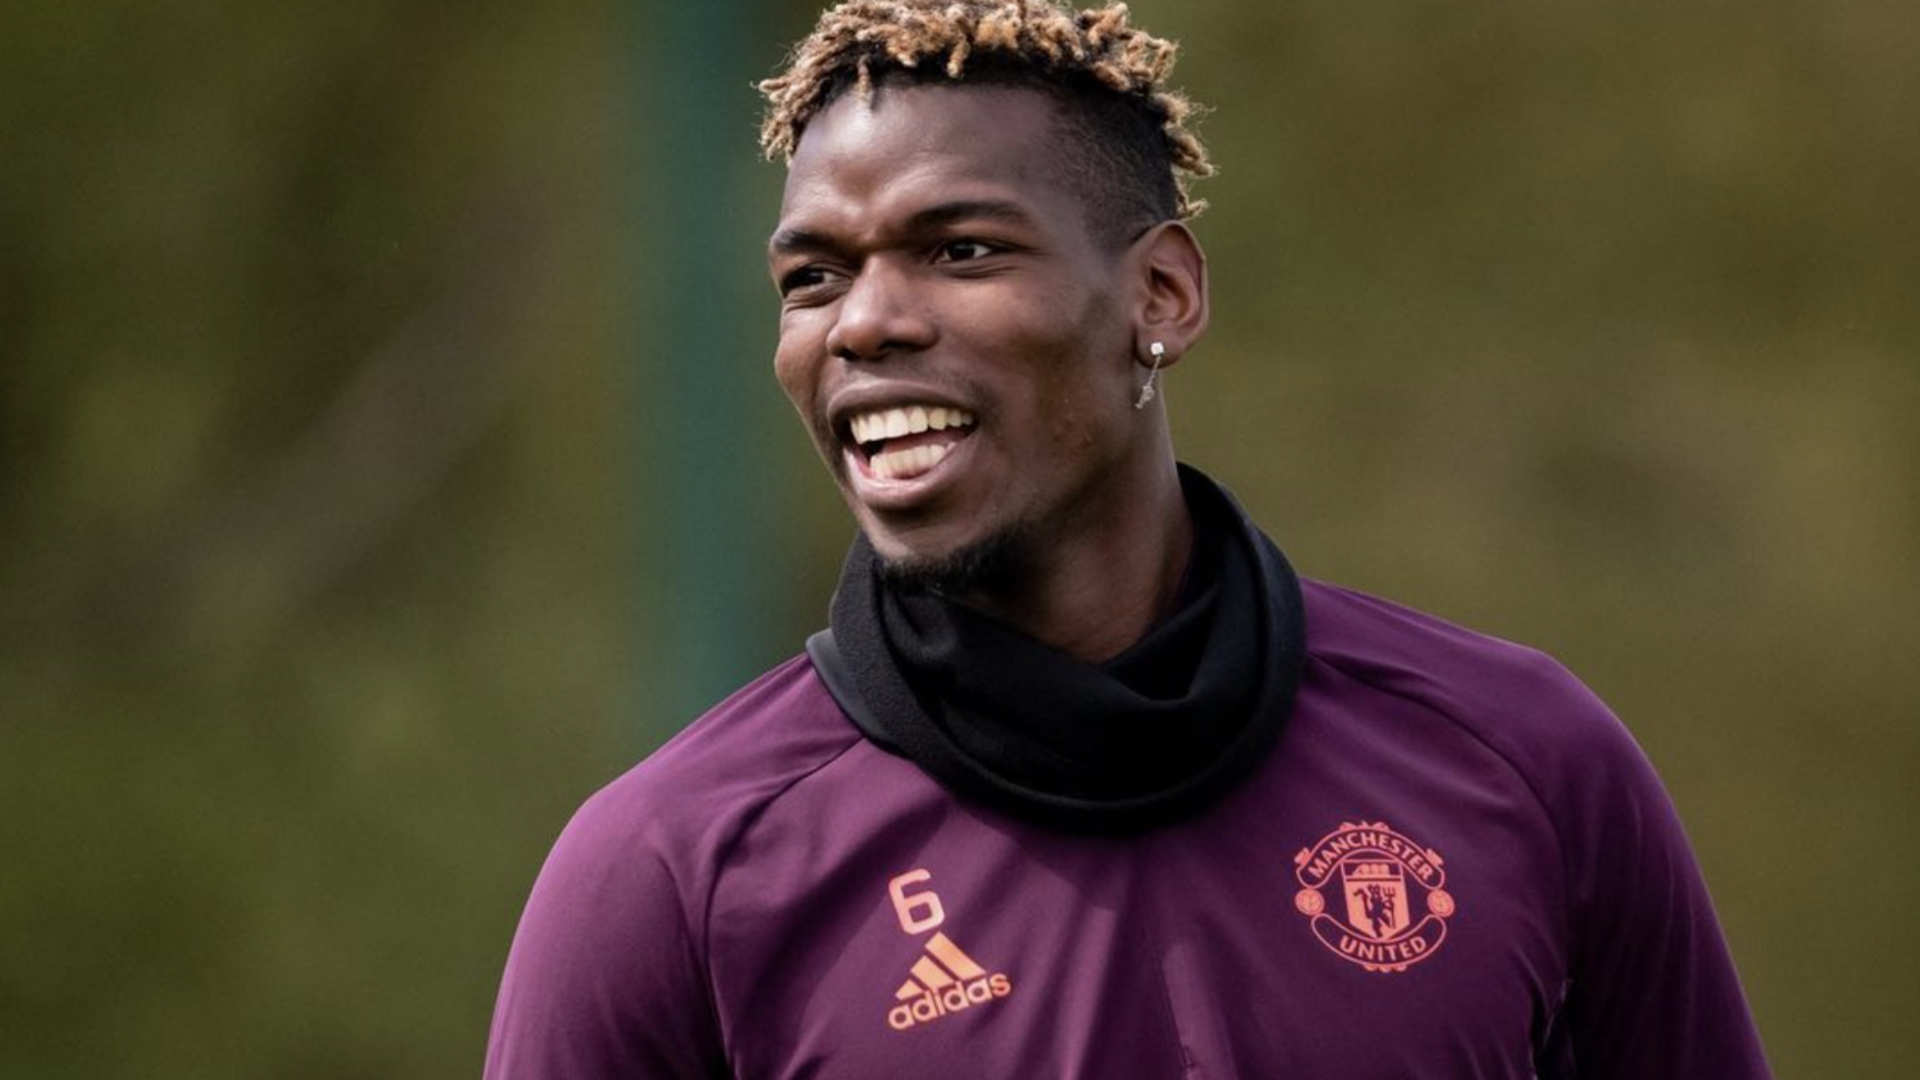 Manchester United player Paul Pogba